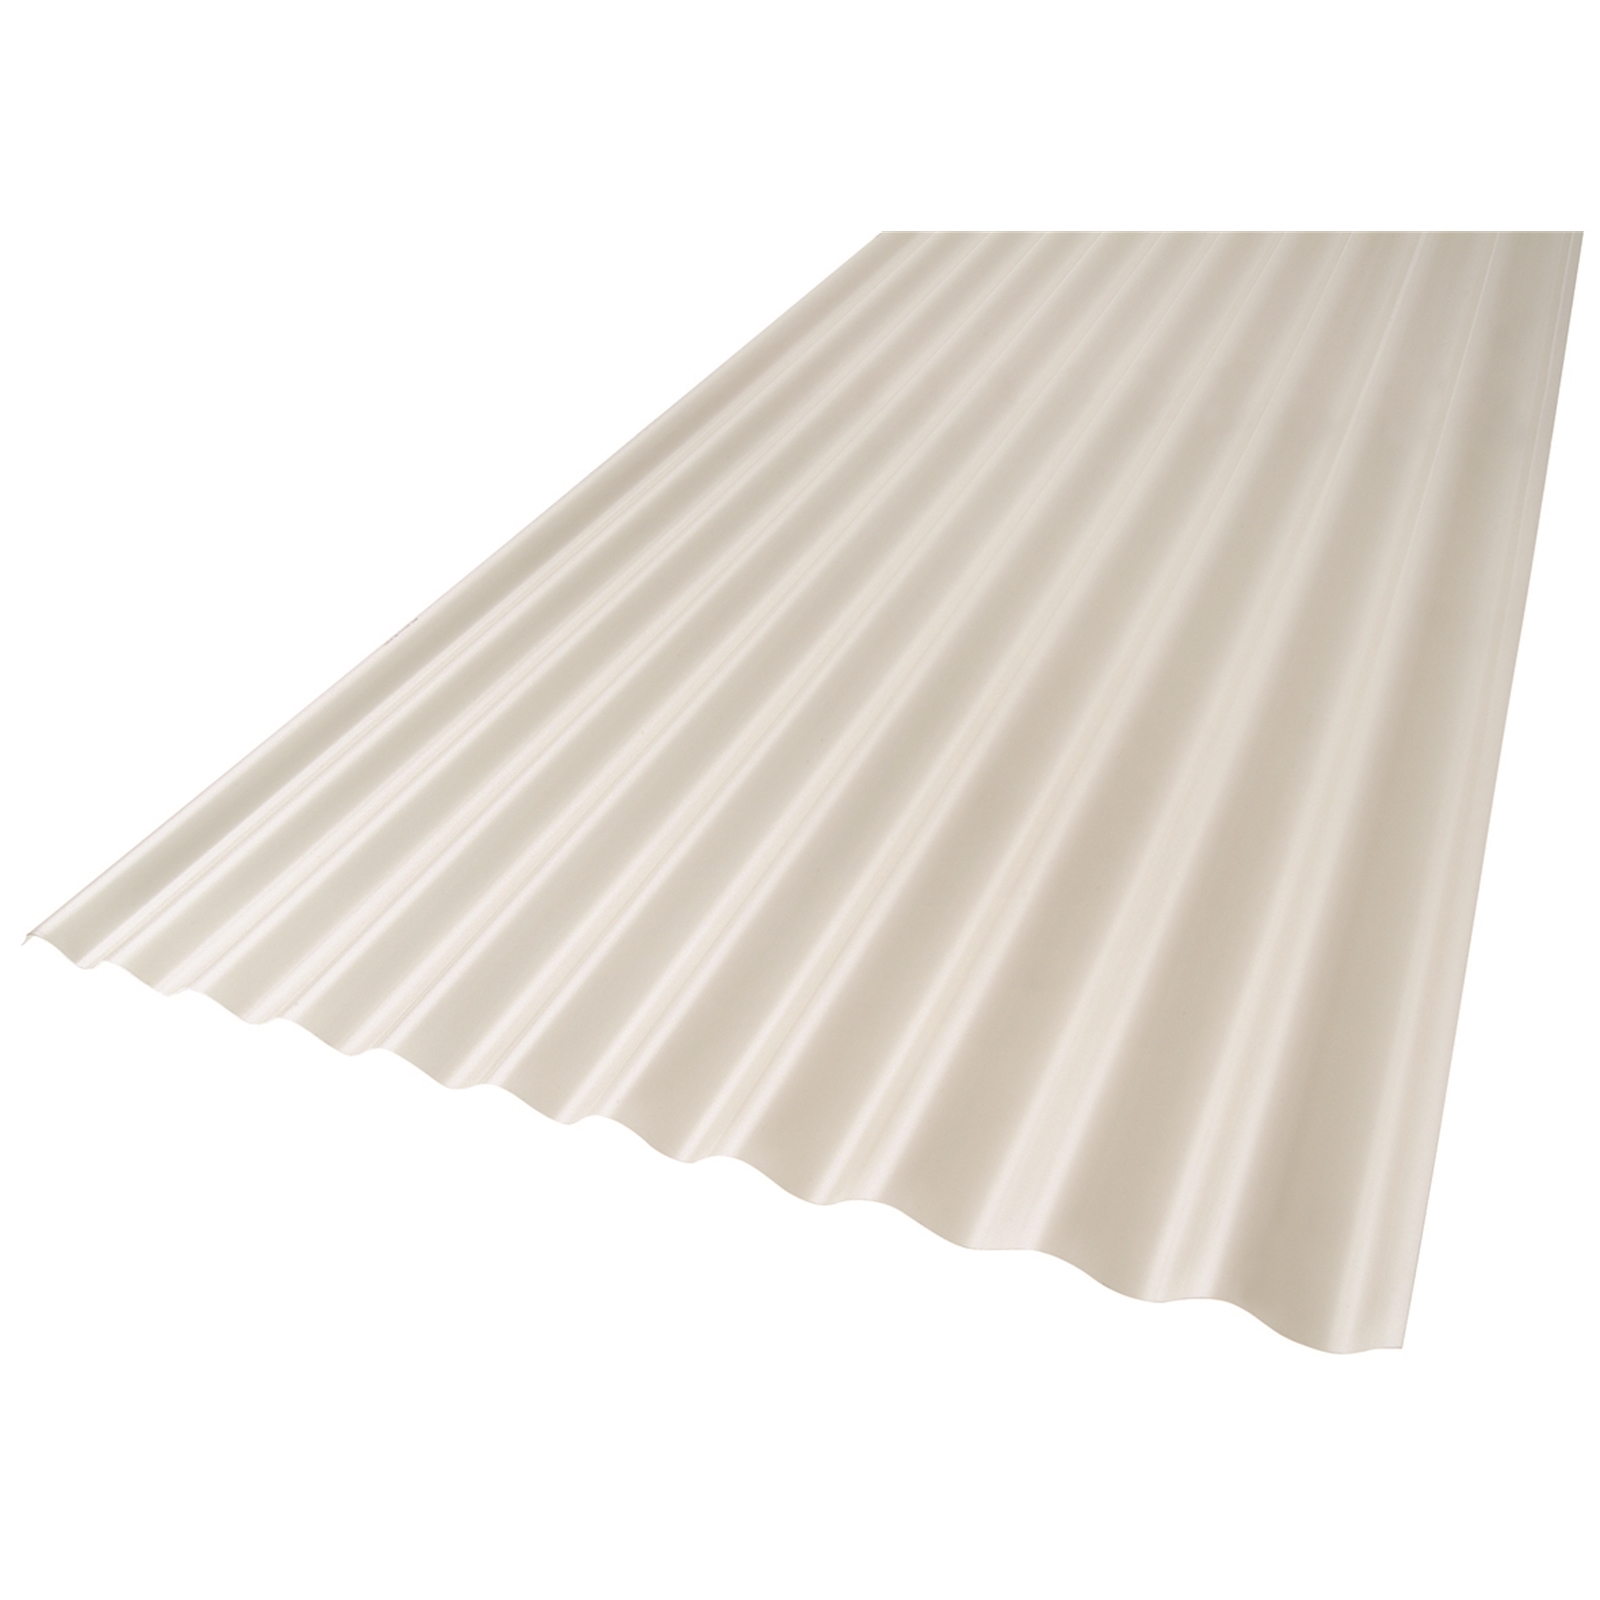 Suntuf Solarsmart 6.0m Diffused Ice Corrugated Polycarbonate Roofing